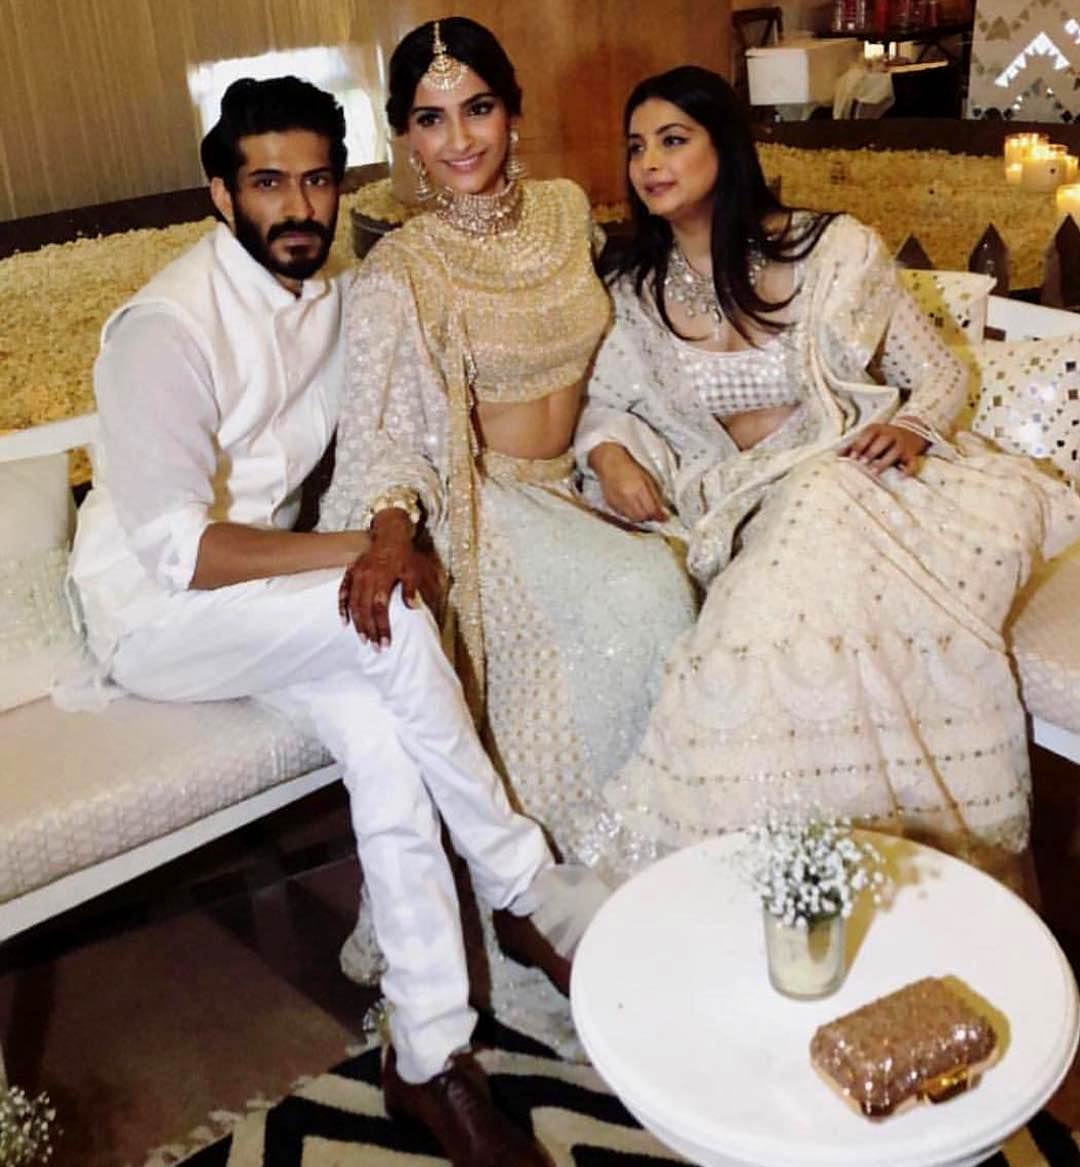 Sonam Kapoor's sister Rhea (right) produced Aisha and Veere Di Wedding, which starred Sonam in the lead role. Their brother, Harshvardhan made his Bollywood debut with Mirzya. He also starred in Vikramaditya Motwane's Bhavesh Joshi Superhero!